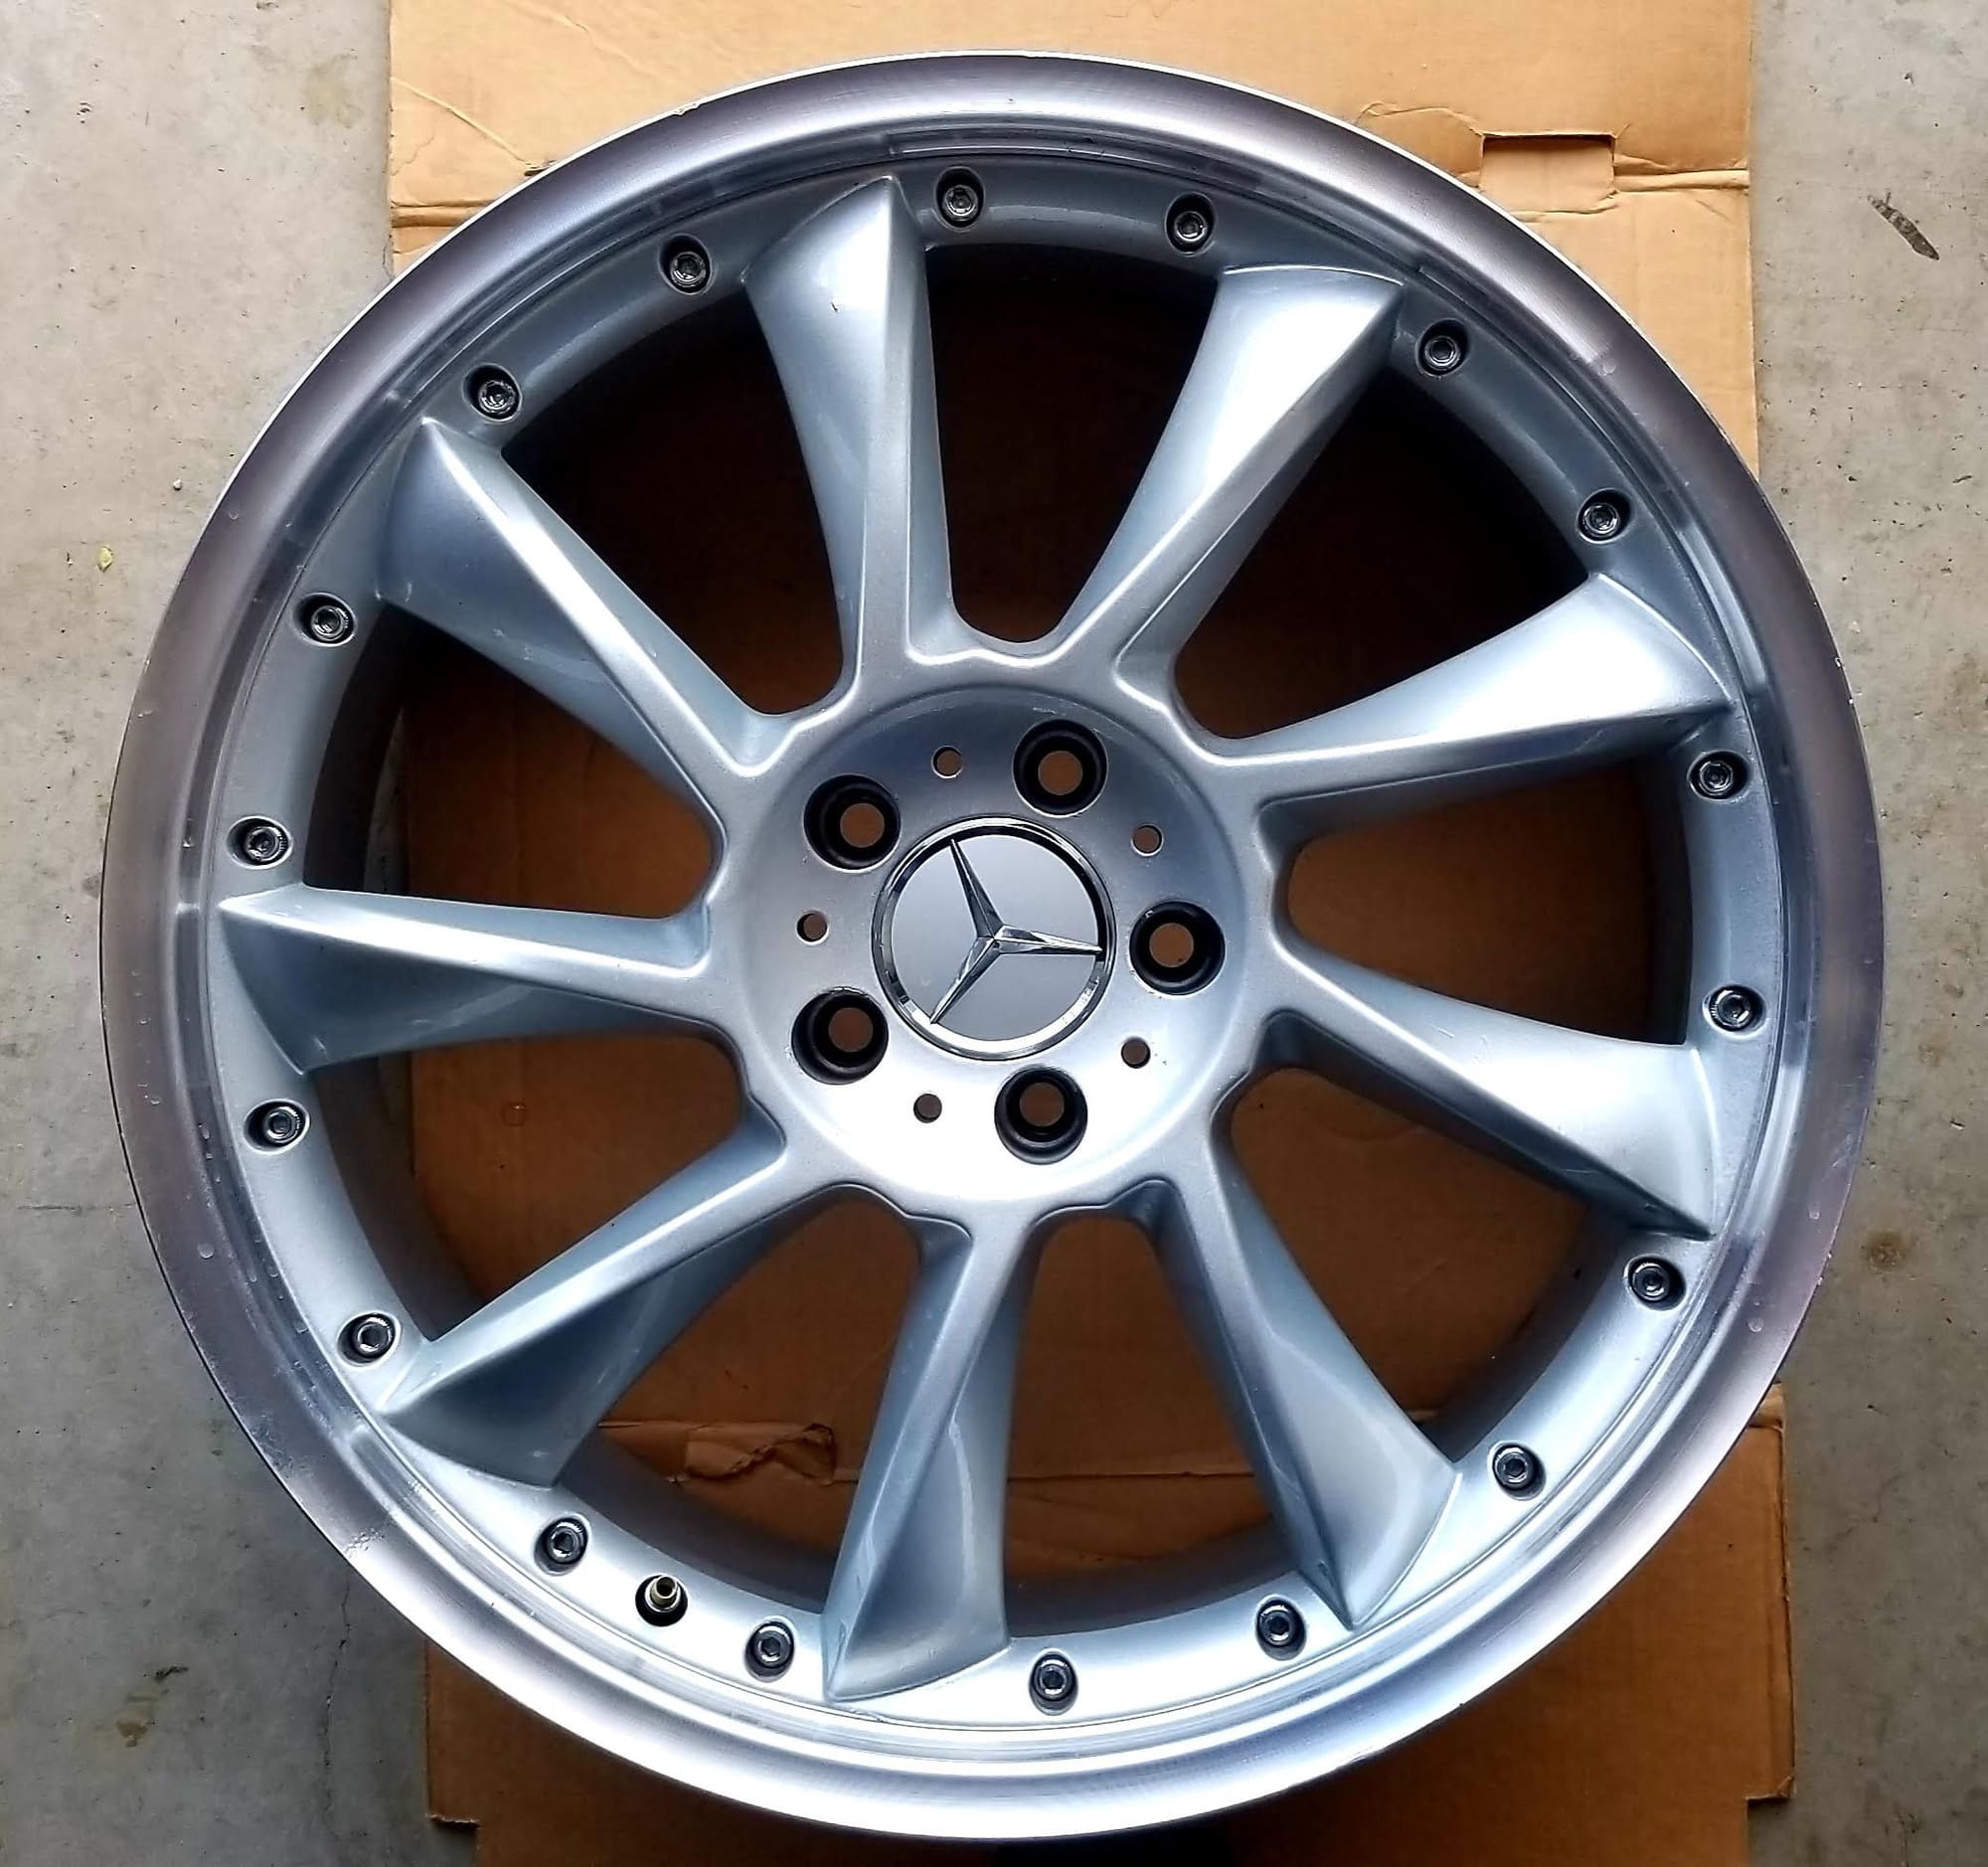 Wheels and Tires/Axles - 19" Staggered Replica SLR Mercedes Wheels Hollander 65344, 65345 LORINSER Style - Used - Dallas, TX 75040, United States